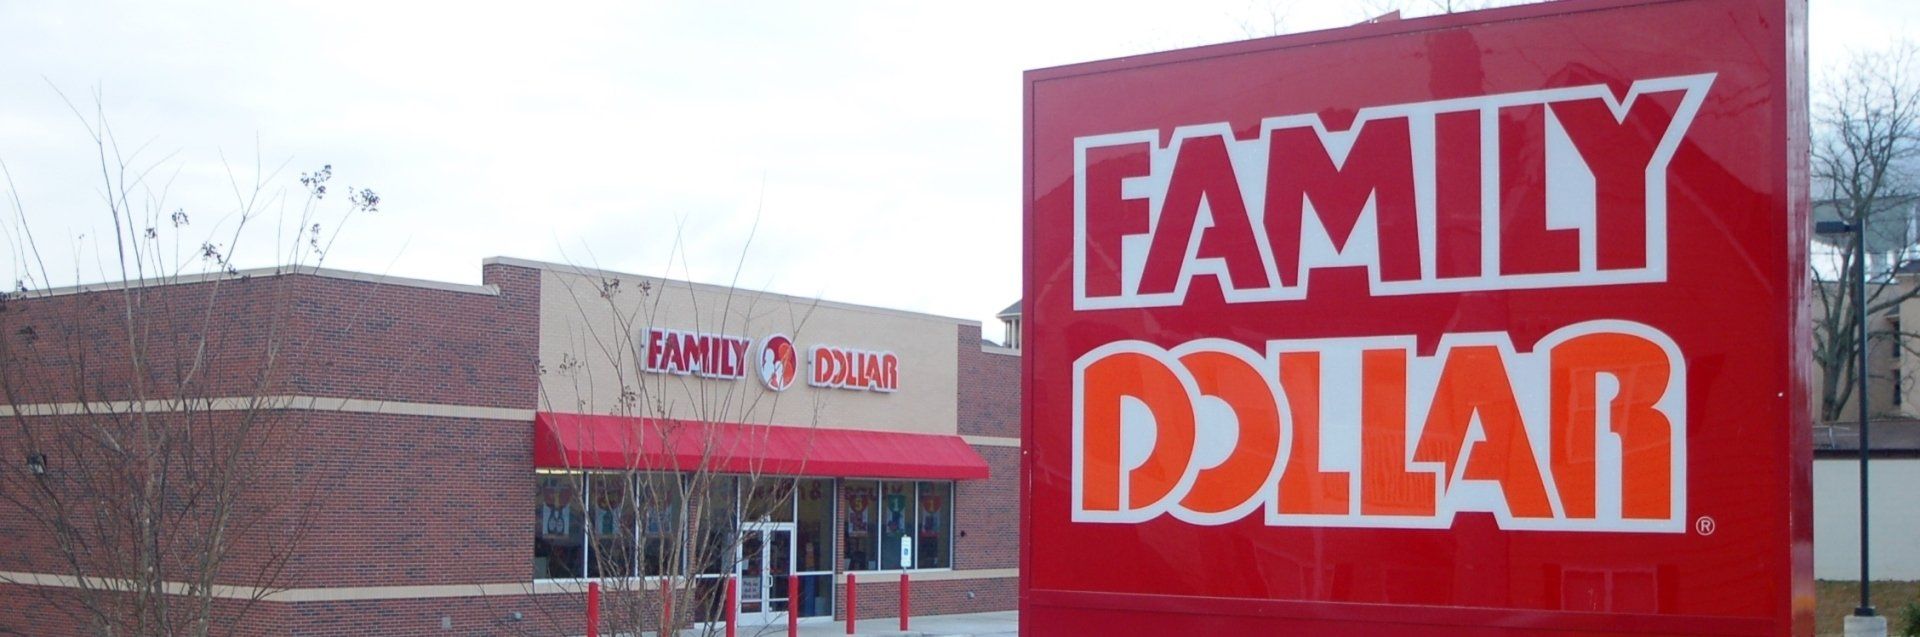 A family dollar store with a red sign in front of it